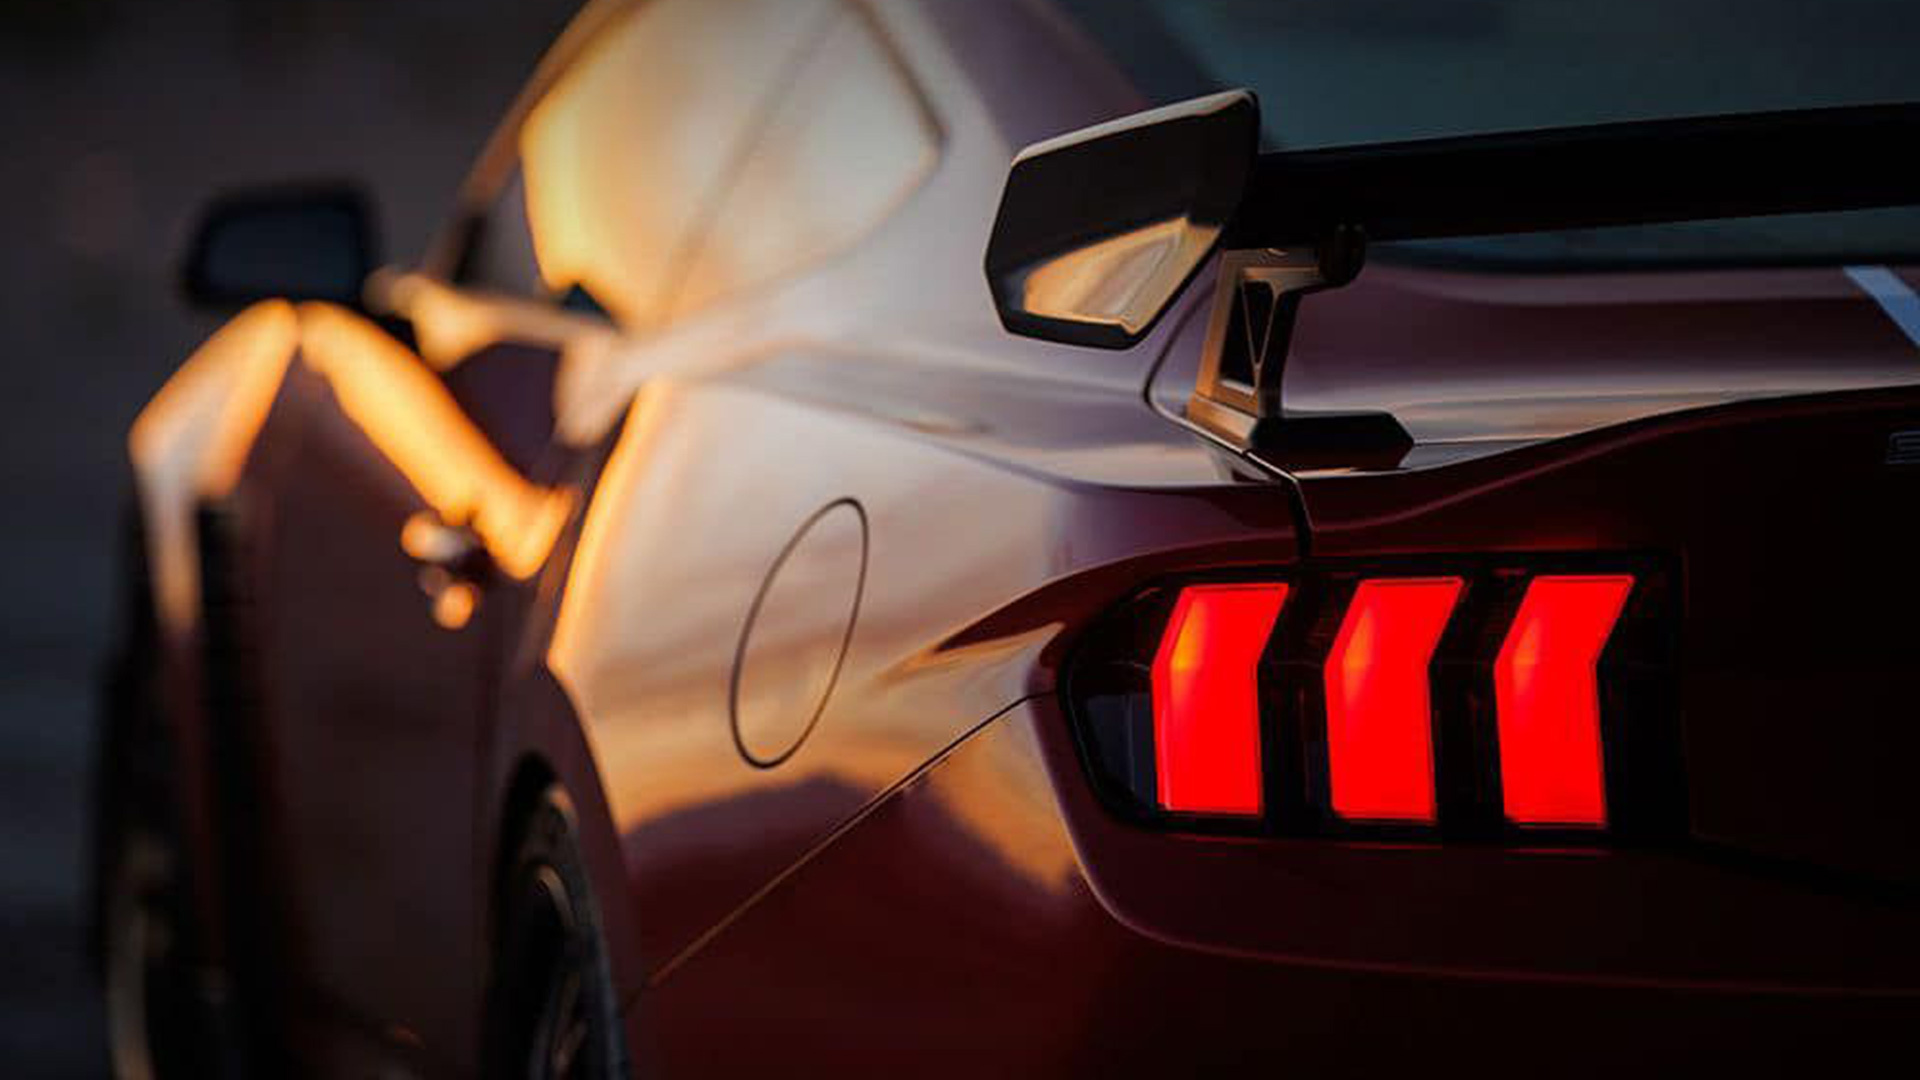 Shelby American Is Cooking Up A Very Particular Ford Mustang Is It A